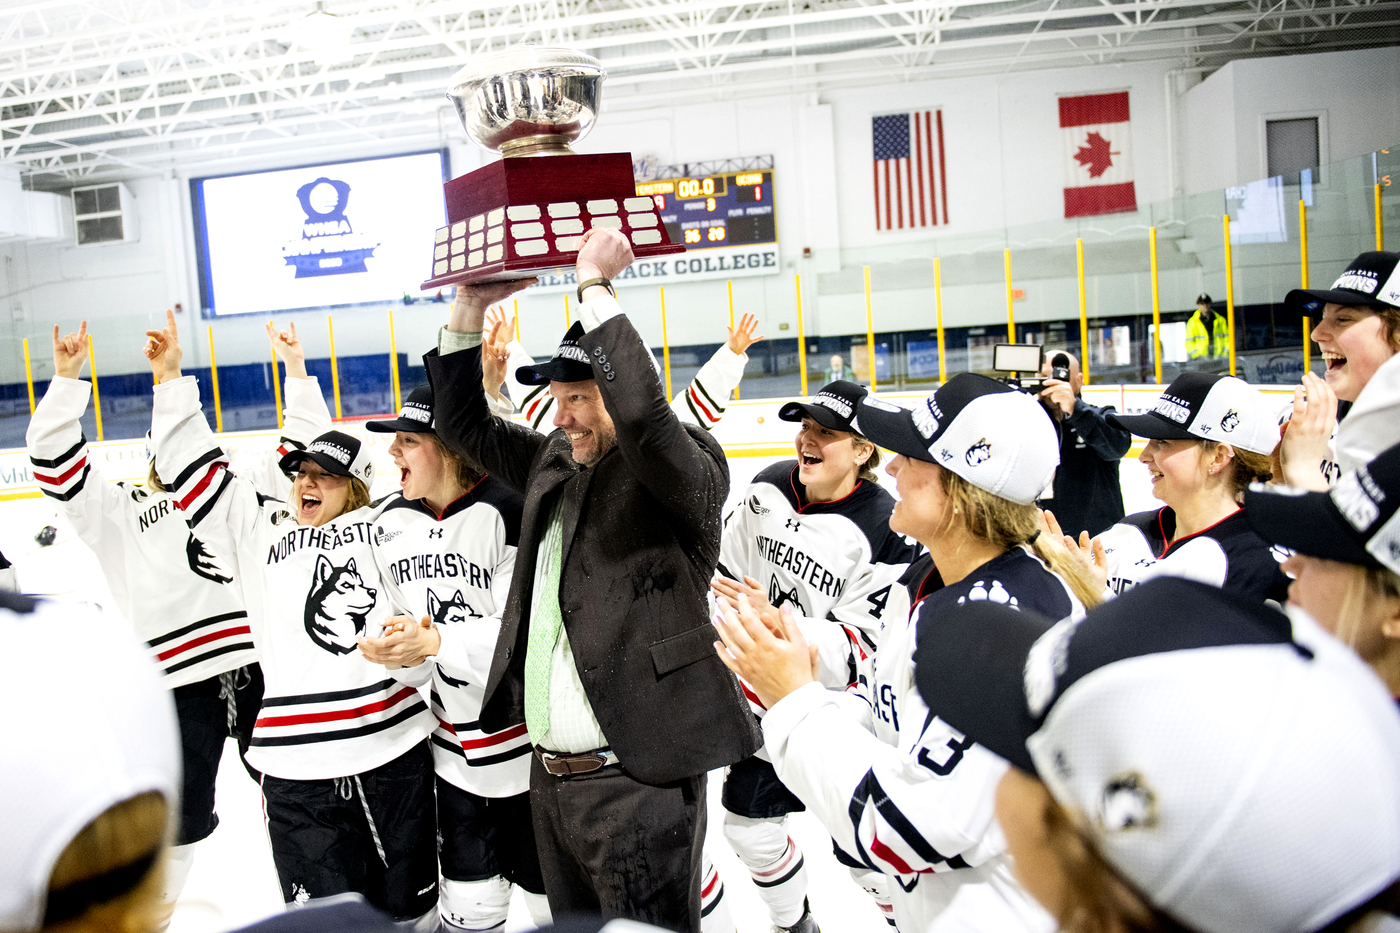 Northeastern coach Dave Flint raises a trophy surrounded by his players.